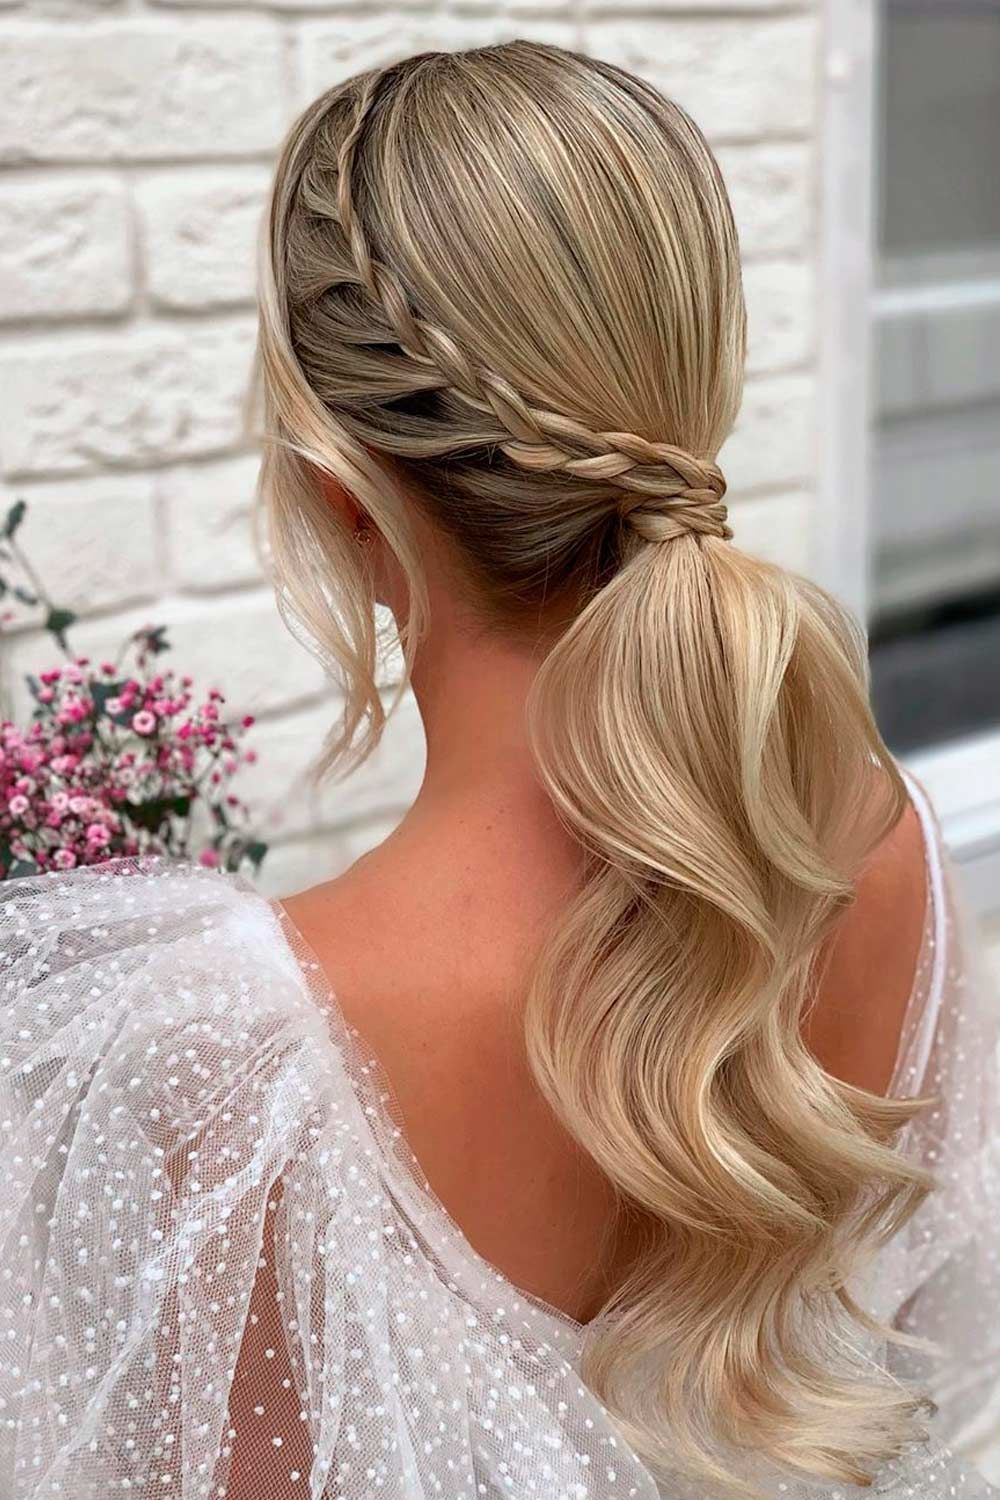 Low Ponytail For Wedding